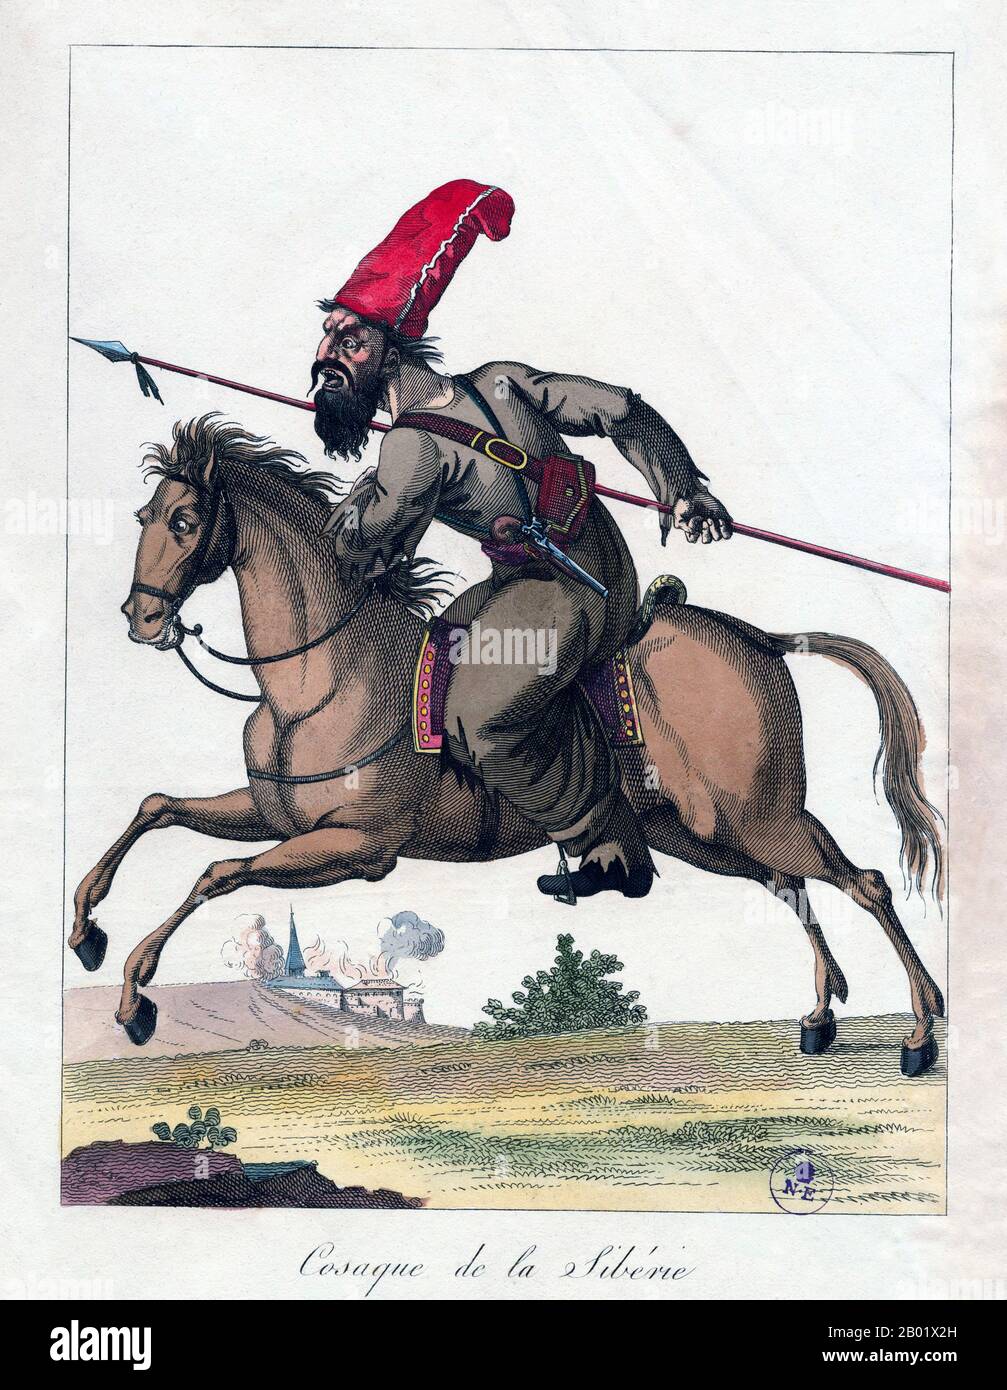 Russia/France: 'Cosaque de la Sibérie' - Siberian Cossack. Chez Jean, Paris, 1814.  Cossacks are a group of predominantly East Slavic people who originally were members of democratic, semi-military communities in Ukraine and Southern Russia. They inhabited sparsely populated areas and islands in the lower Dnieper and Don basins, and played an important role in the historical development of both Ukraine and Russia.  The origins of the first Cossacks are disputed. Traditional historiography dates the emergence of Cossacks to the 14th to 15th centuries. Stock Photo